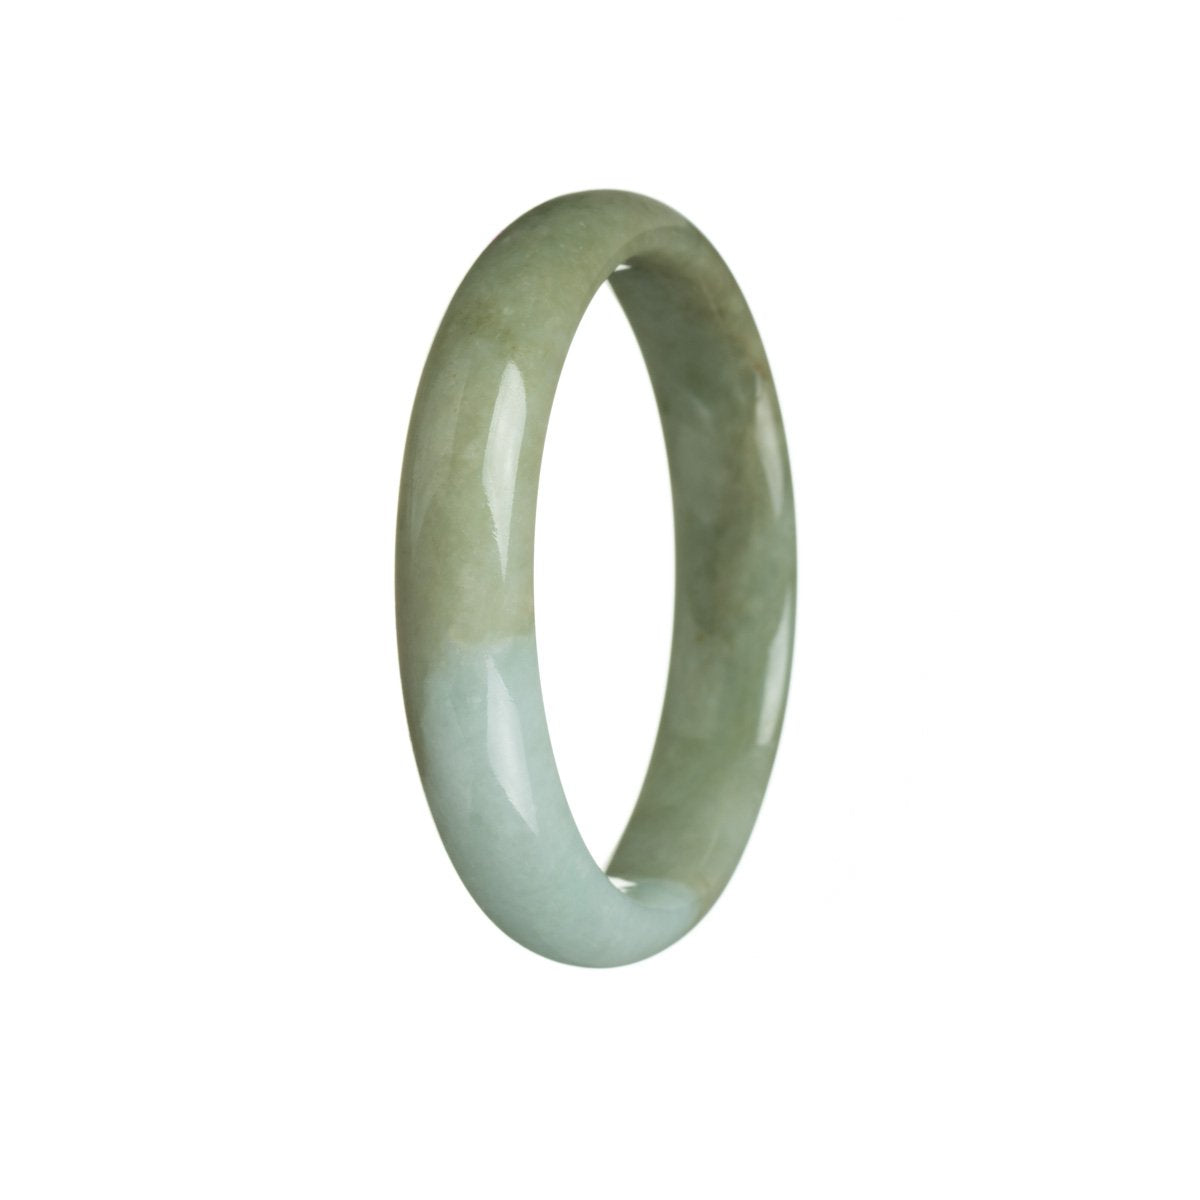 A close-up image of a stunning green jade bangle bracelet with a half moon shape. This authentic Grade A piece is made with care and precision, showcasing the natural beauty of the green jade stone. Perfect for adding a touch of elegance to any outfit.